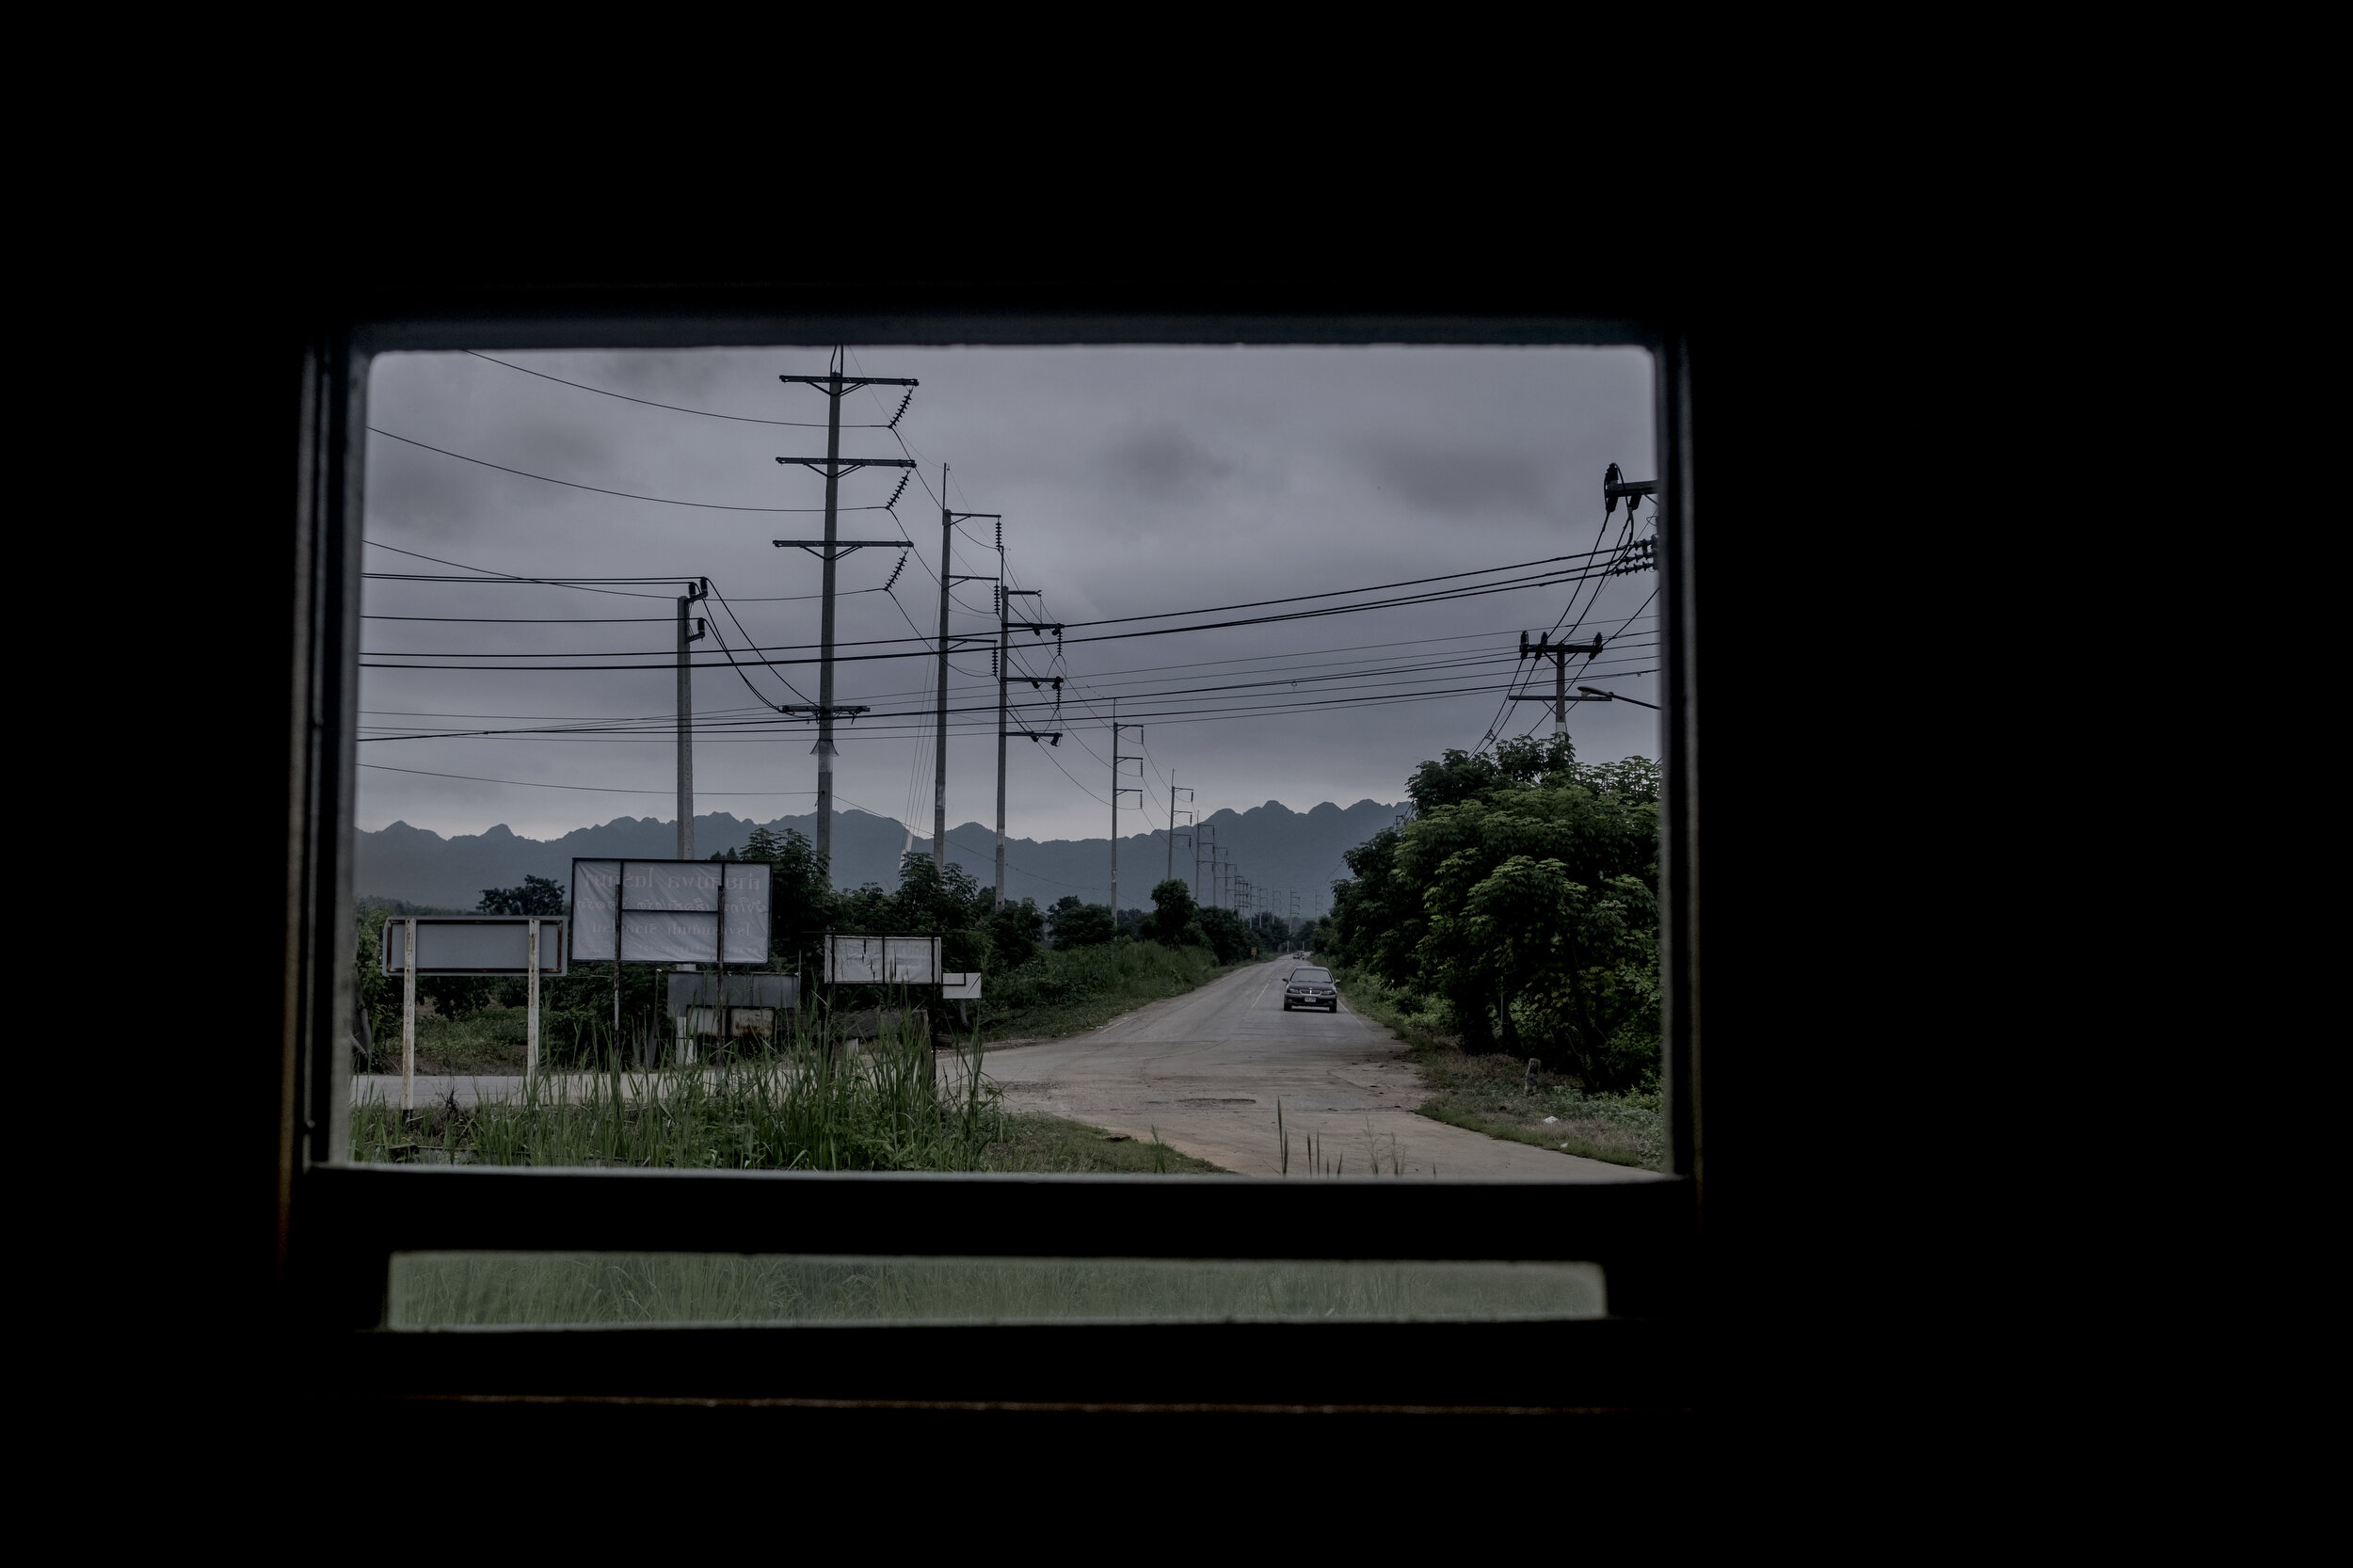  Window vignettes on the journey along the infamous ‘death railway’ built by Allied prisoners during World War II. 